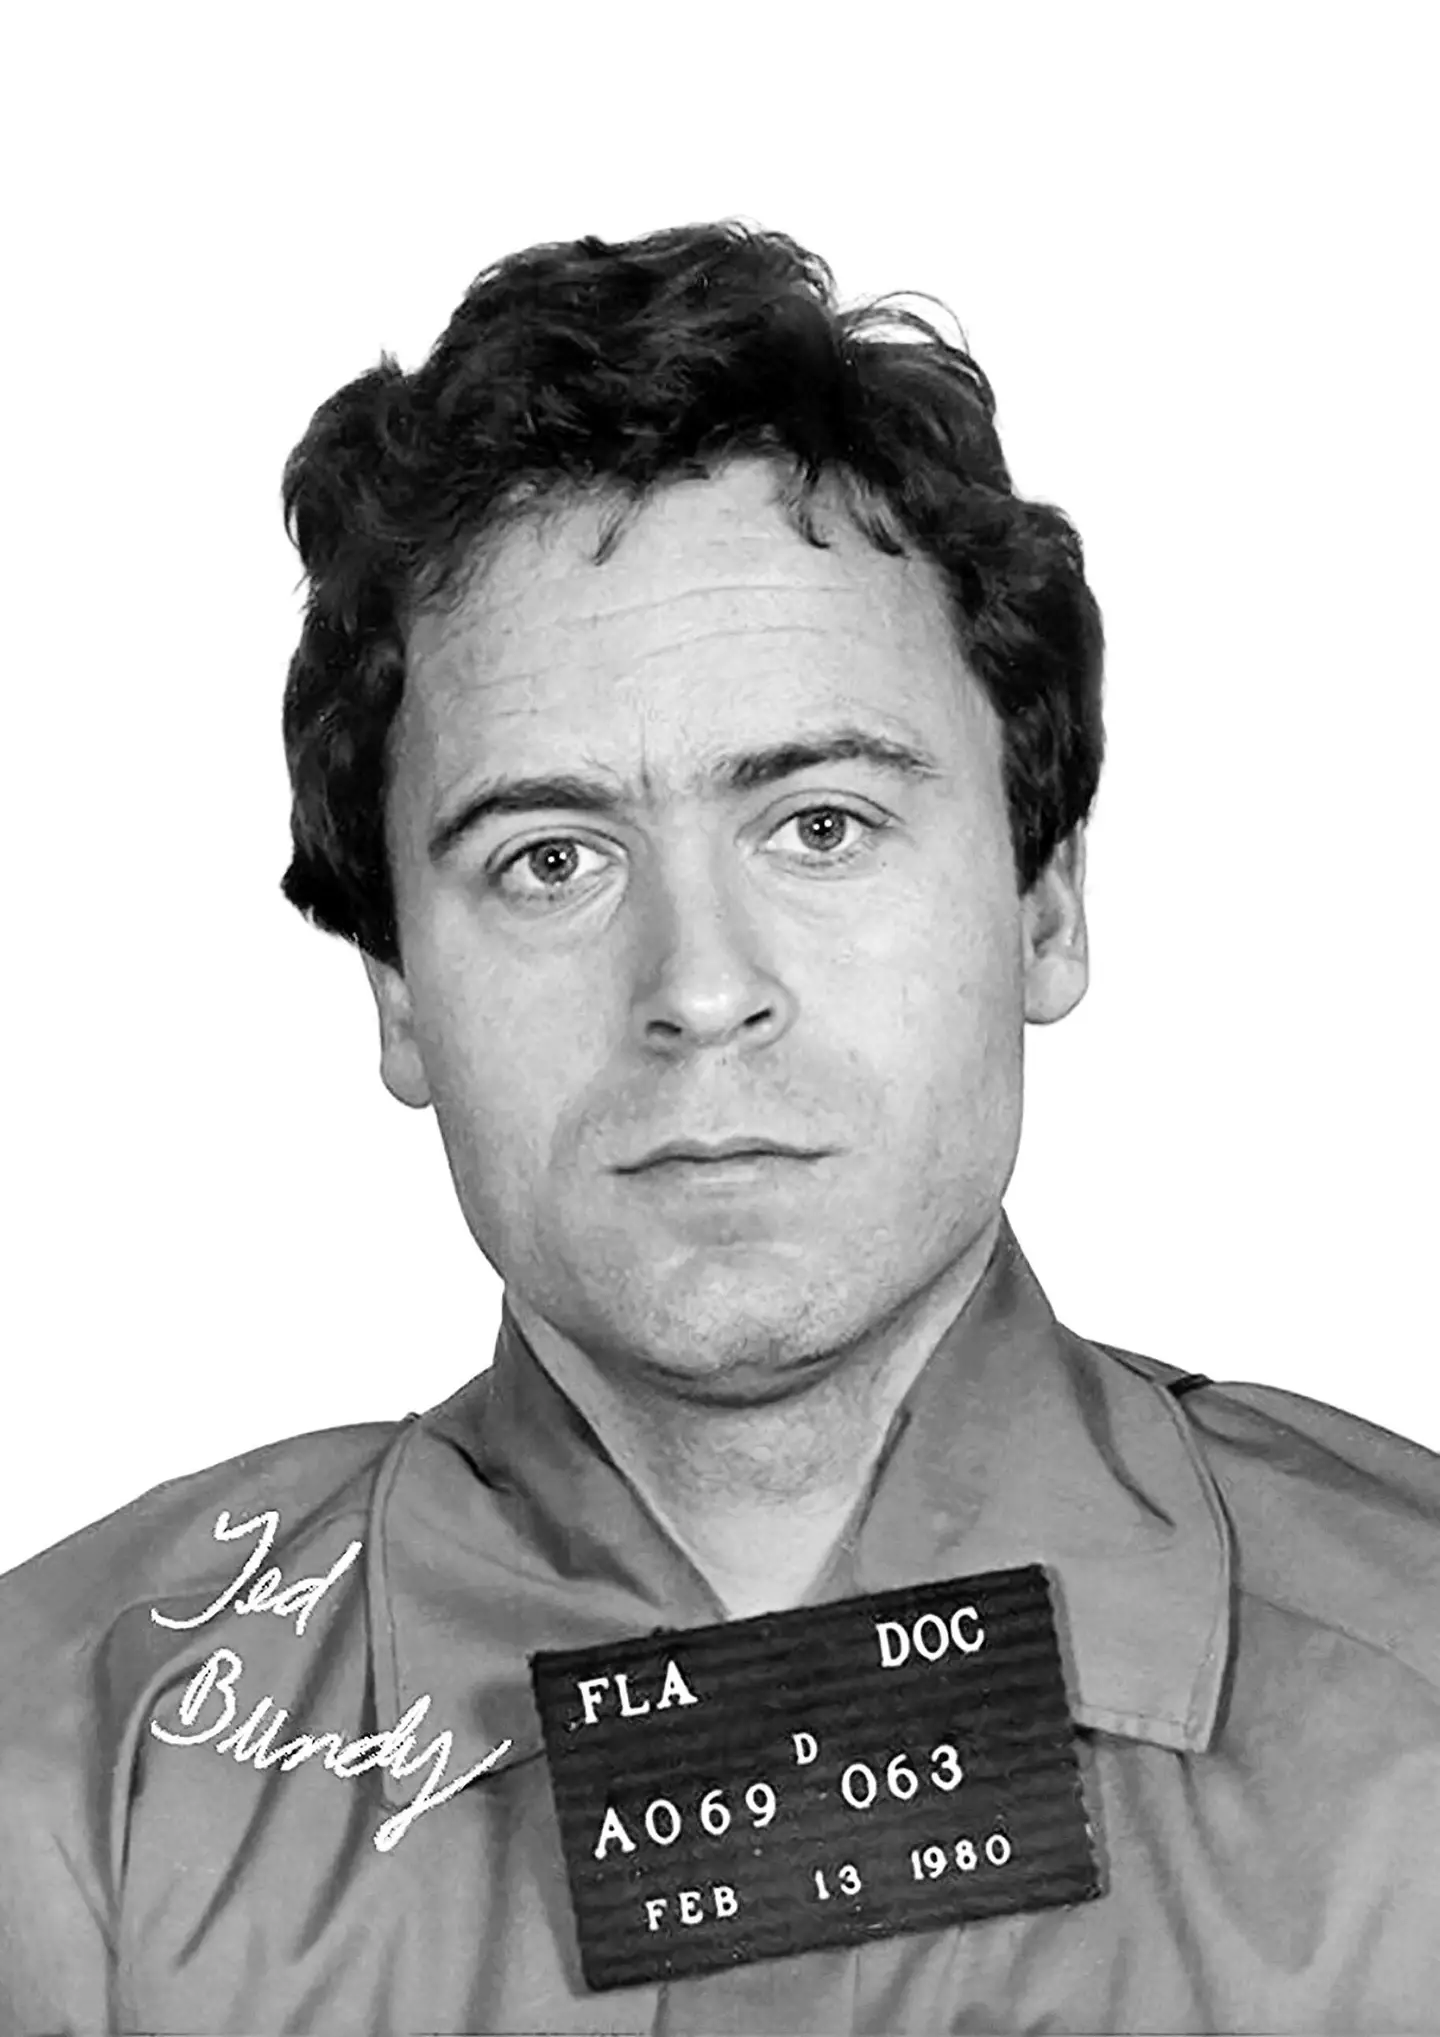 Ted Bundy was found guilty of kidnapping, raping and murdering 30 young women and girls during the 1970s.